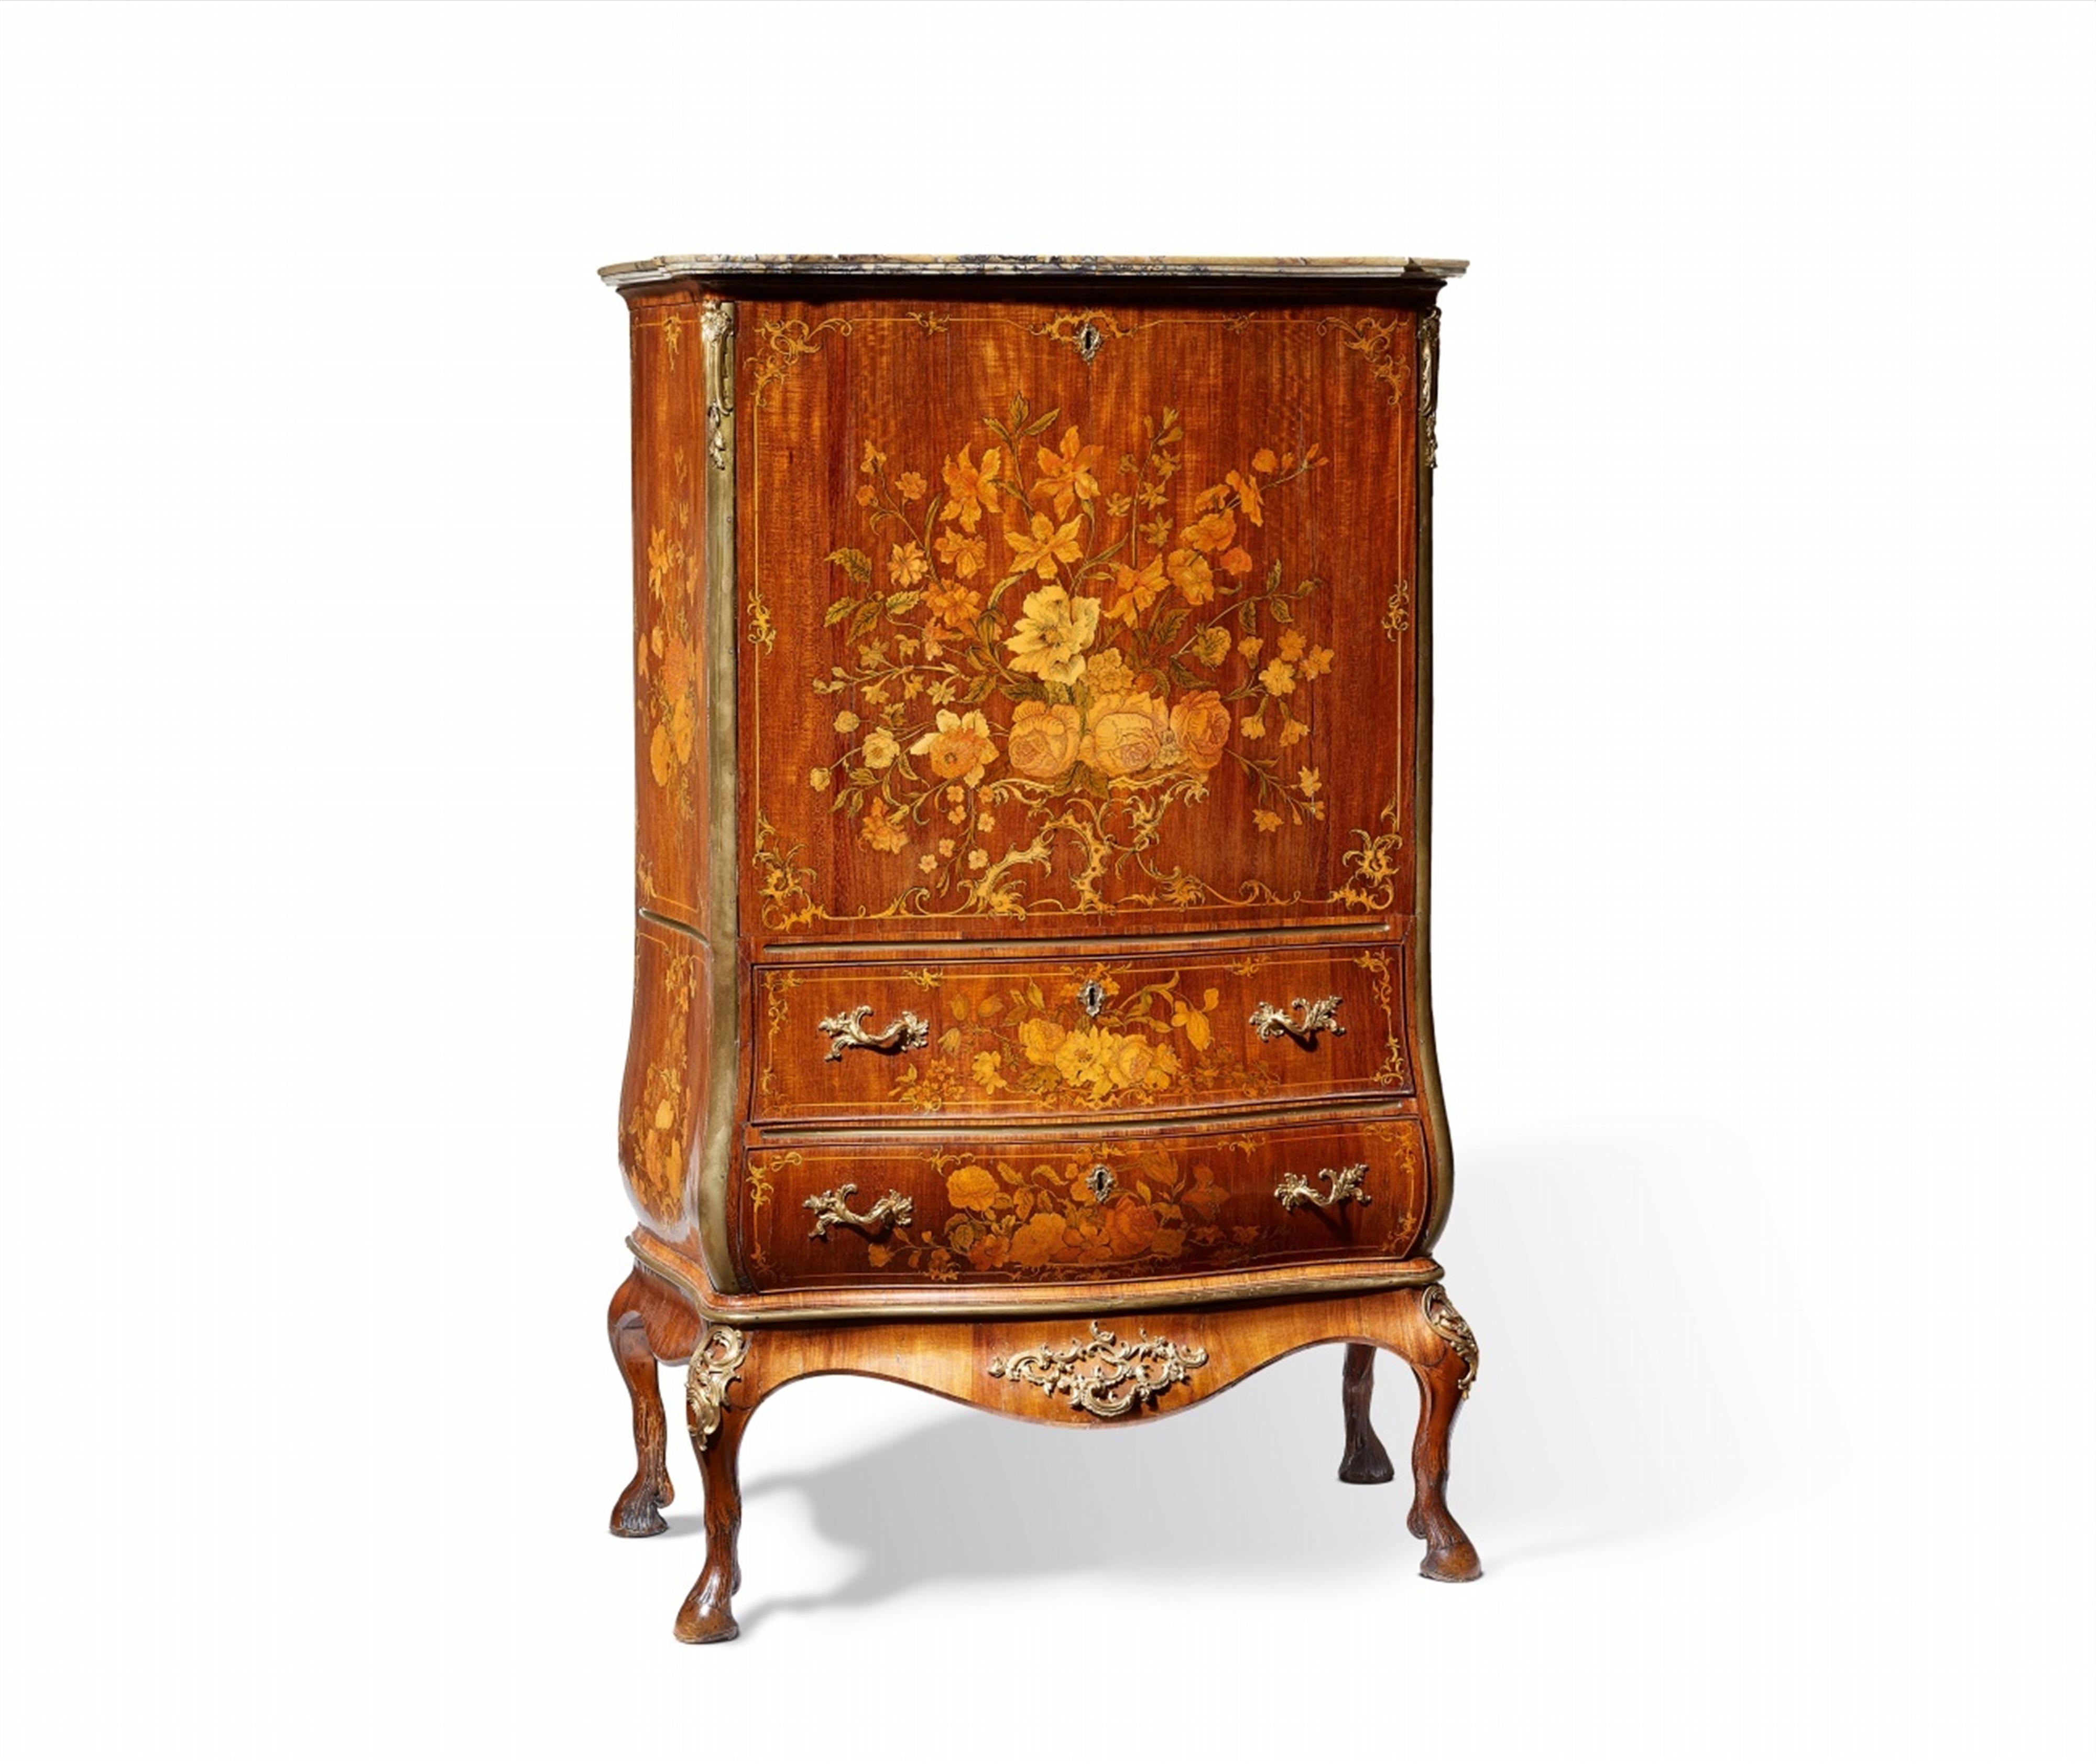 A highly important writing desk by Abraham Roentgen - 